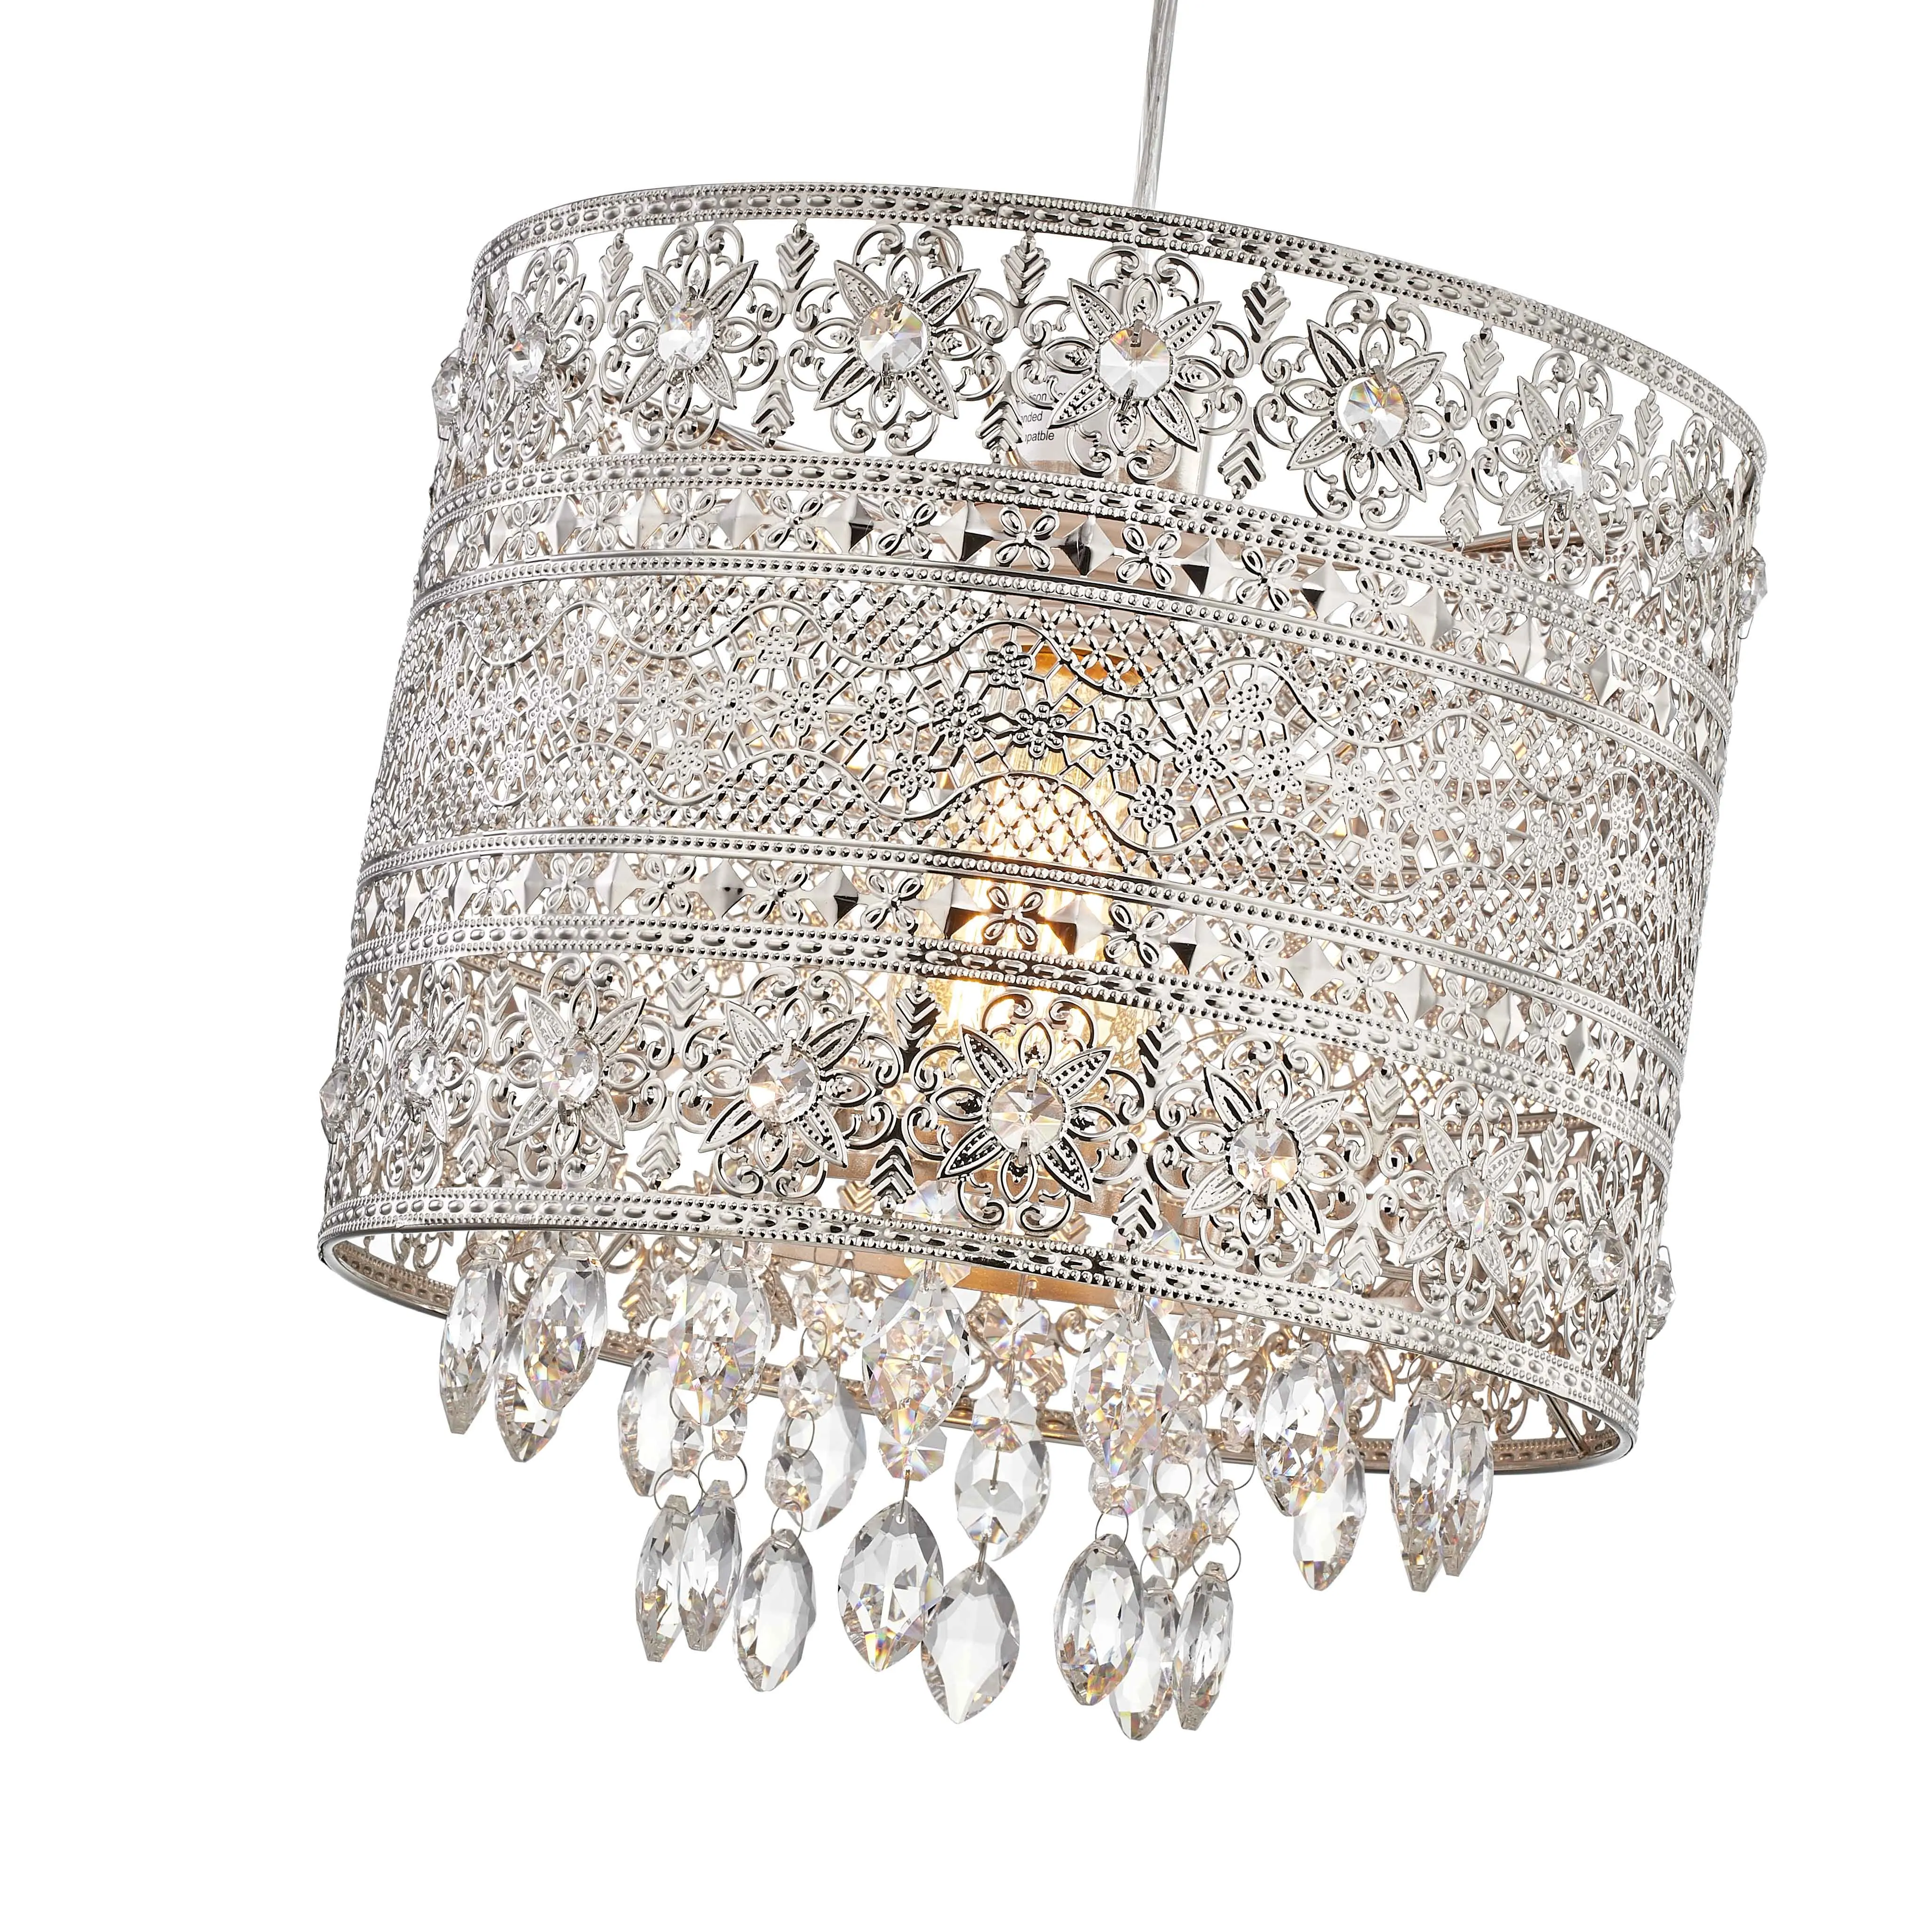 Round Shade Fitting Universal home decorative Sparkling Crystal Jewel Droplets Chandelier Ceiling pendant light